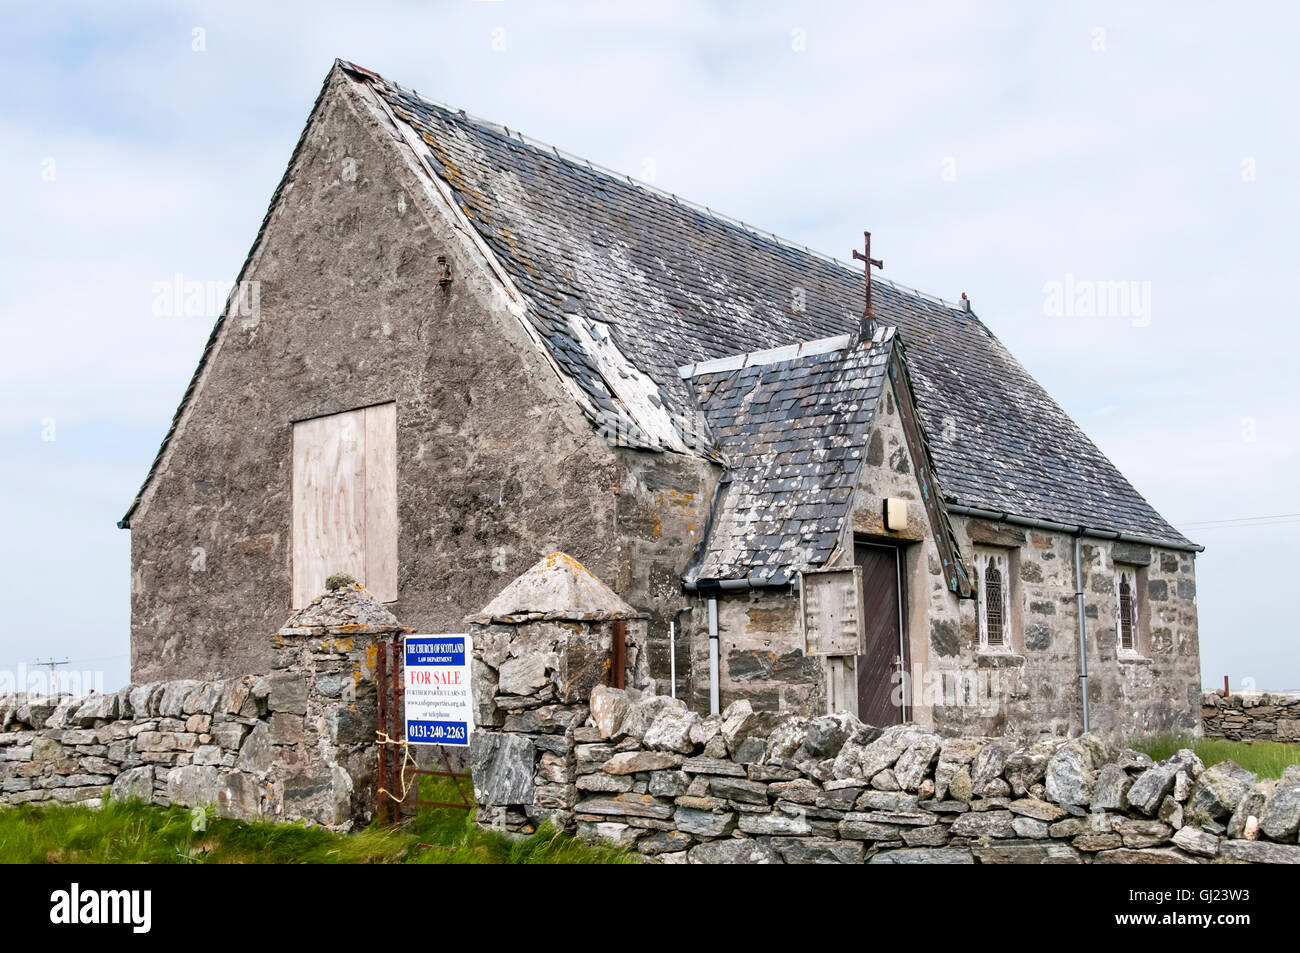 Offers are invited of over £50,000 for the sale of this redundant church on South Uist in the Outer Hebrides. Stock Photo